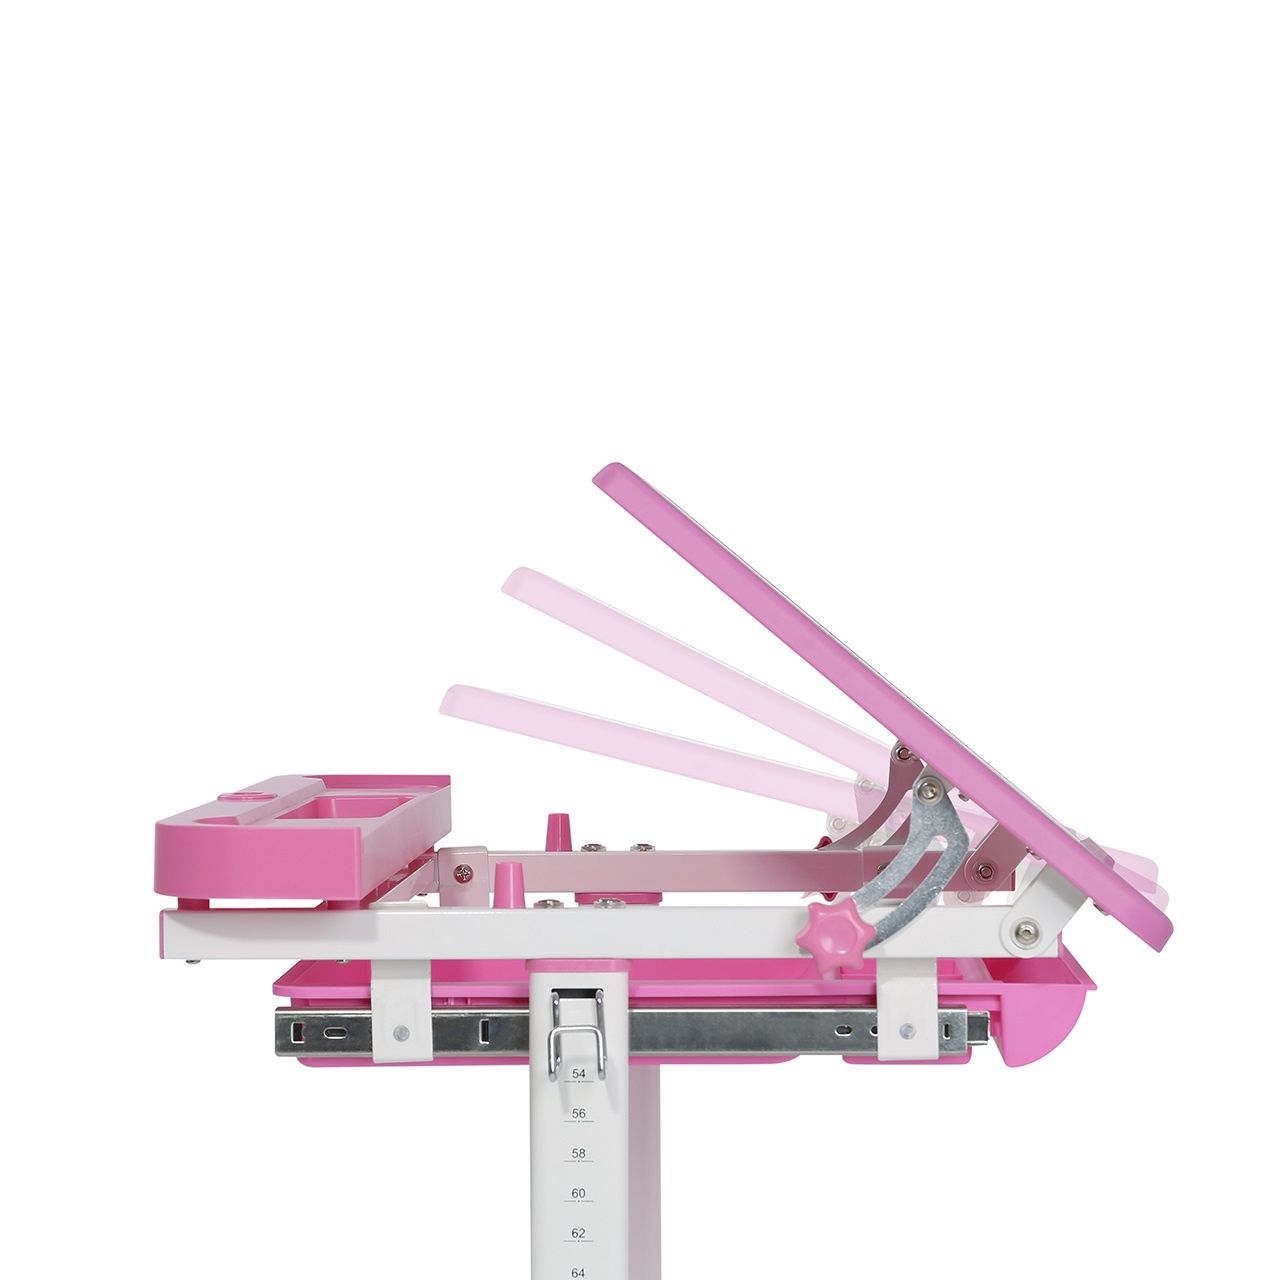    FunDesk Cantare Pink, 515721, , 